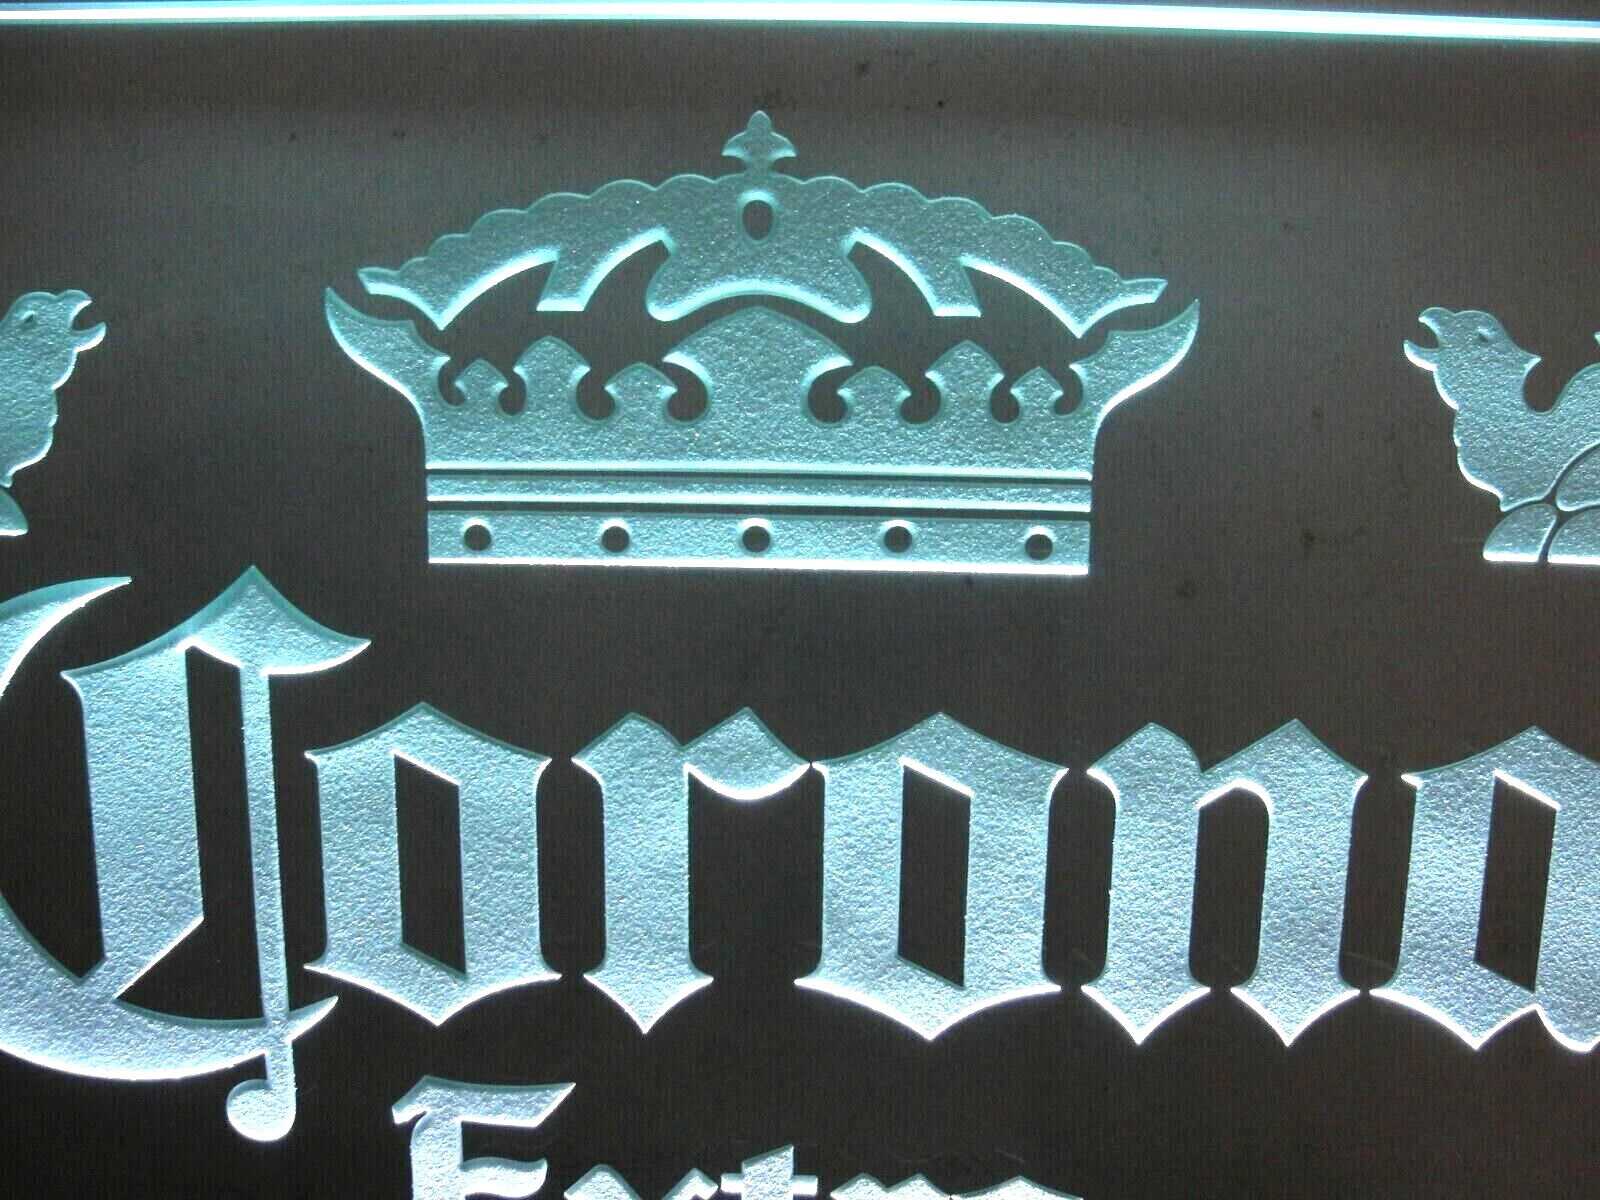 CORONA EXTRA BEER LIGHTED BACK BAR SIGN ETCHED PLATE GLASS WOOD BASE NIB 12x16